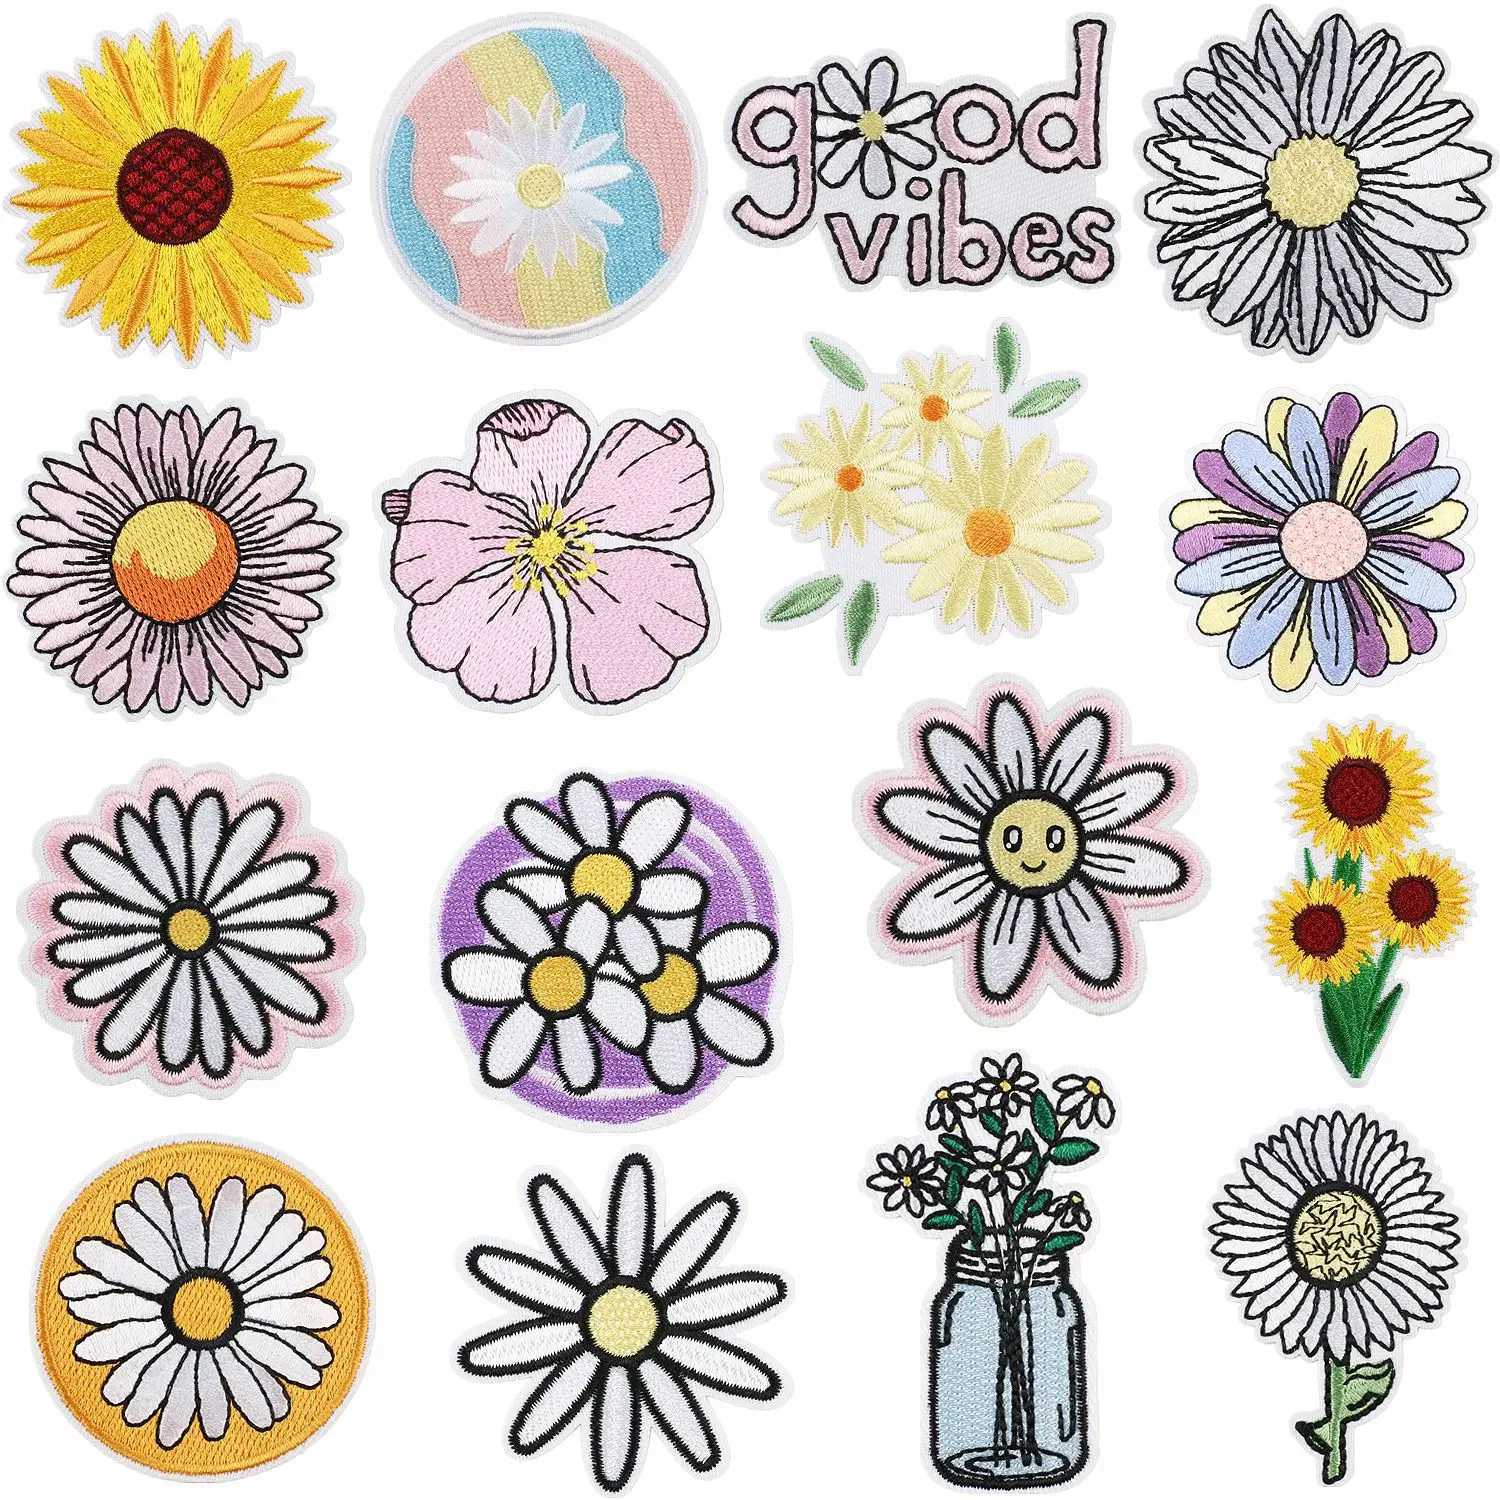 

Exquisite Sunflower Embroidery Iron on Patches White Daisy Blossom Thermo Adhesive Appliques Good Vibes Badge for Girls Clothing